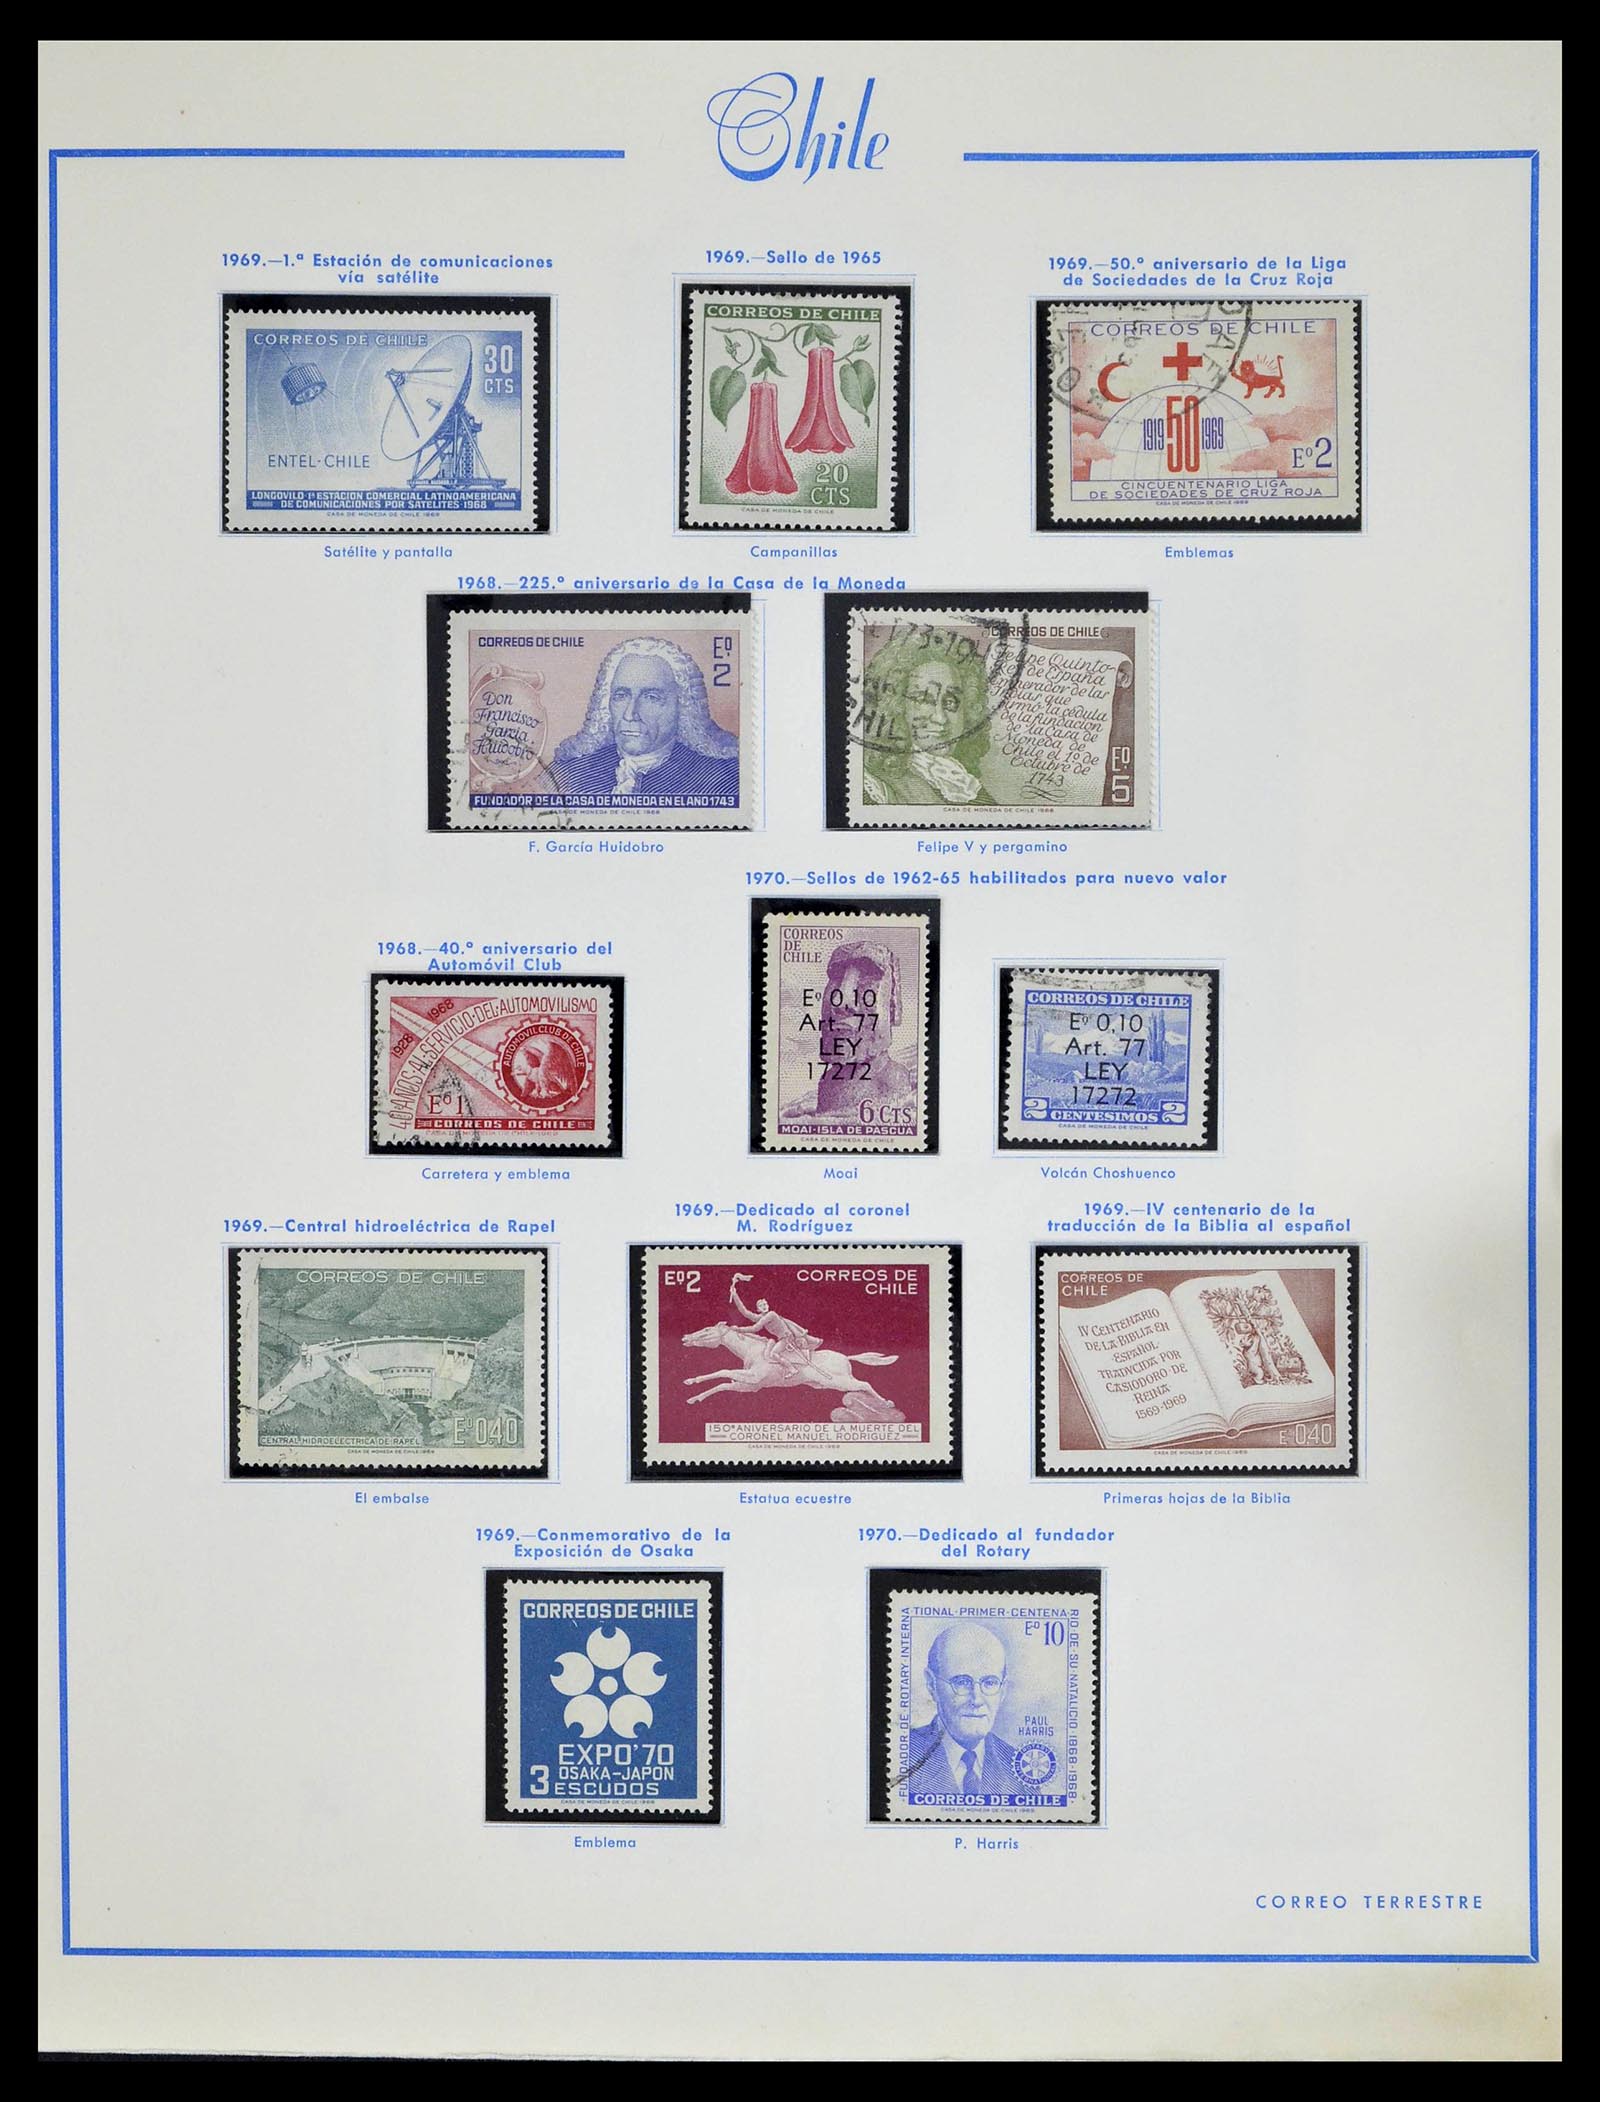 39213 0024 - Stamp collection 39213 Chile 1853-1970.